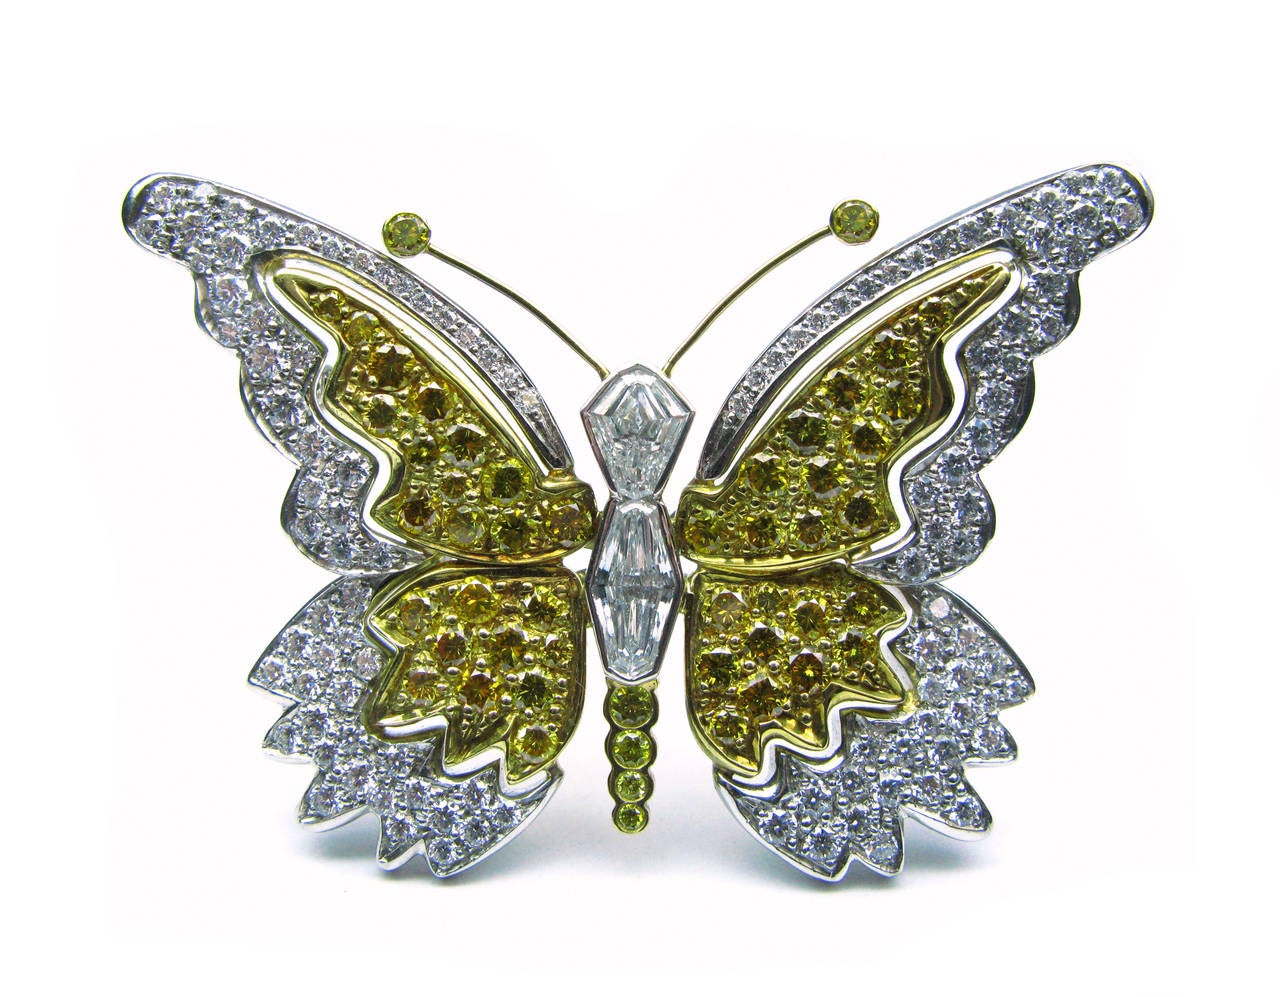 This gorgeous yellow and white diamond butterfly pin, set in platinum and 18kt yellow gold, is a super way to add sparkle to your outfit. It contains 6.78 carats of  E color diamonds and natural fancy intense yellow color diamonds in VS1 clarity. A